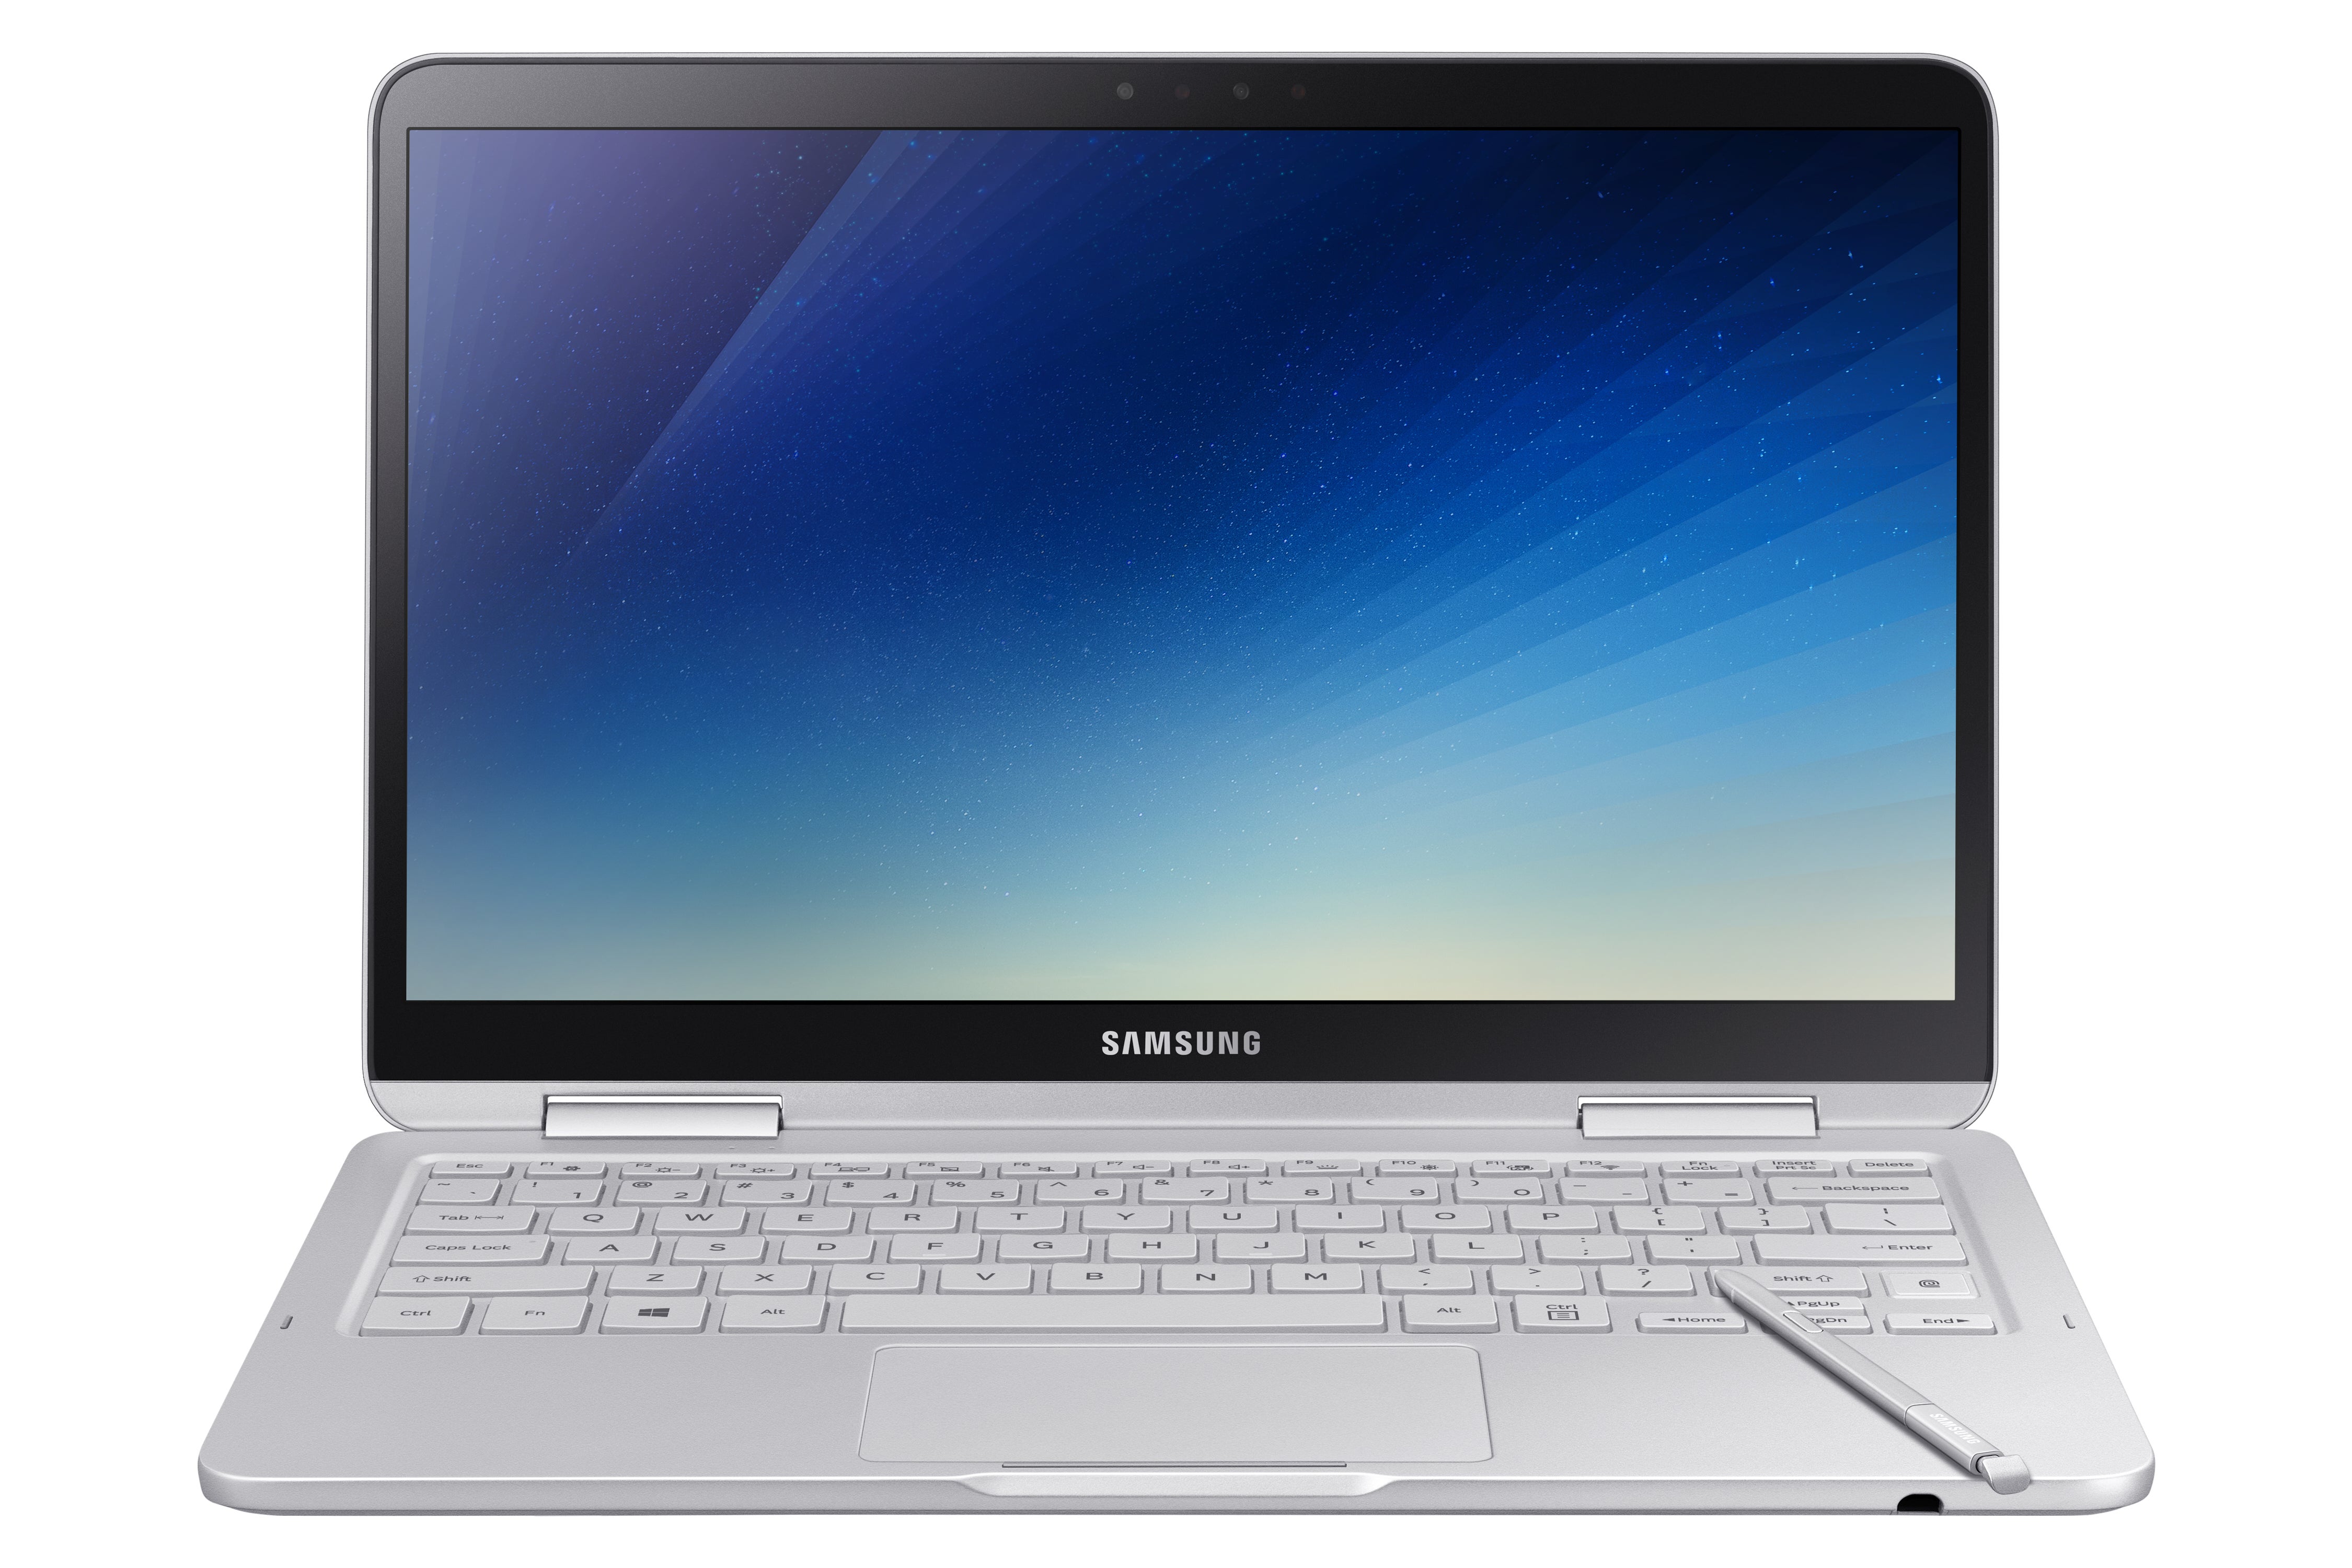 Samsung Notebook 9 Pen laptop with S Pen on keyboard.